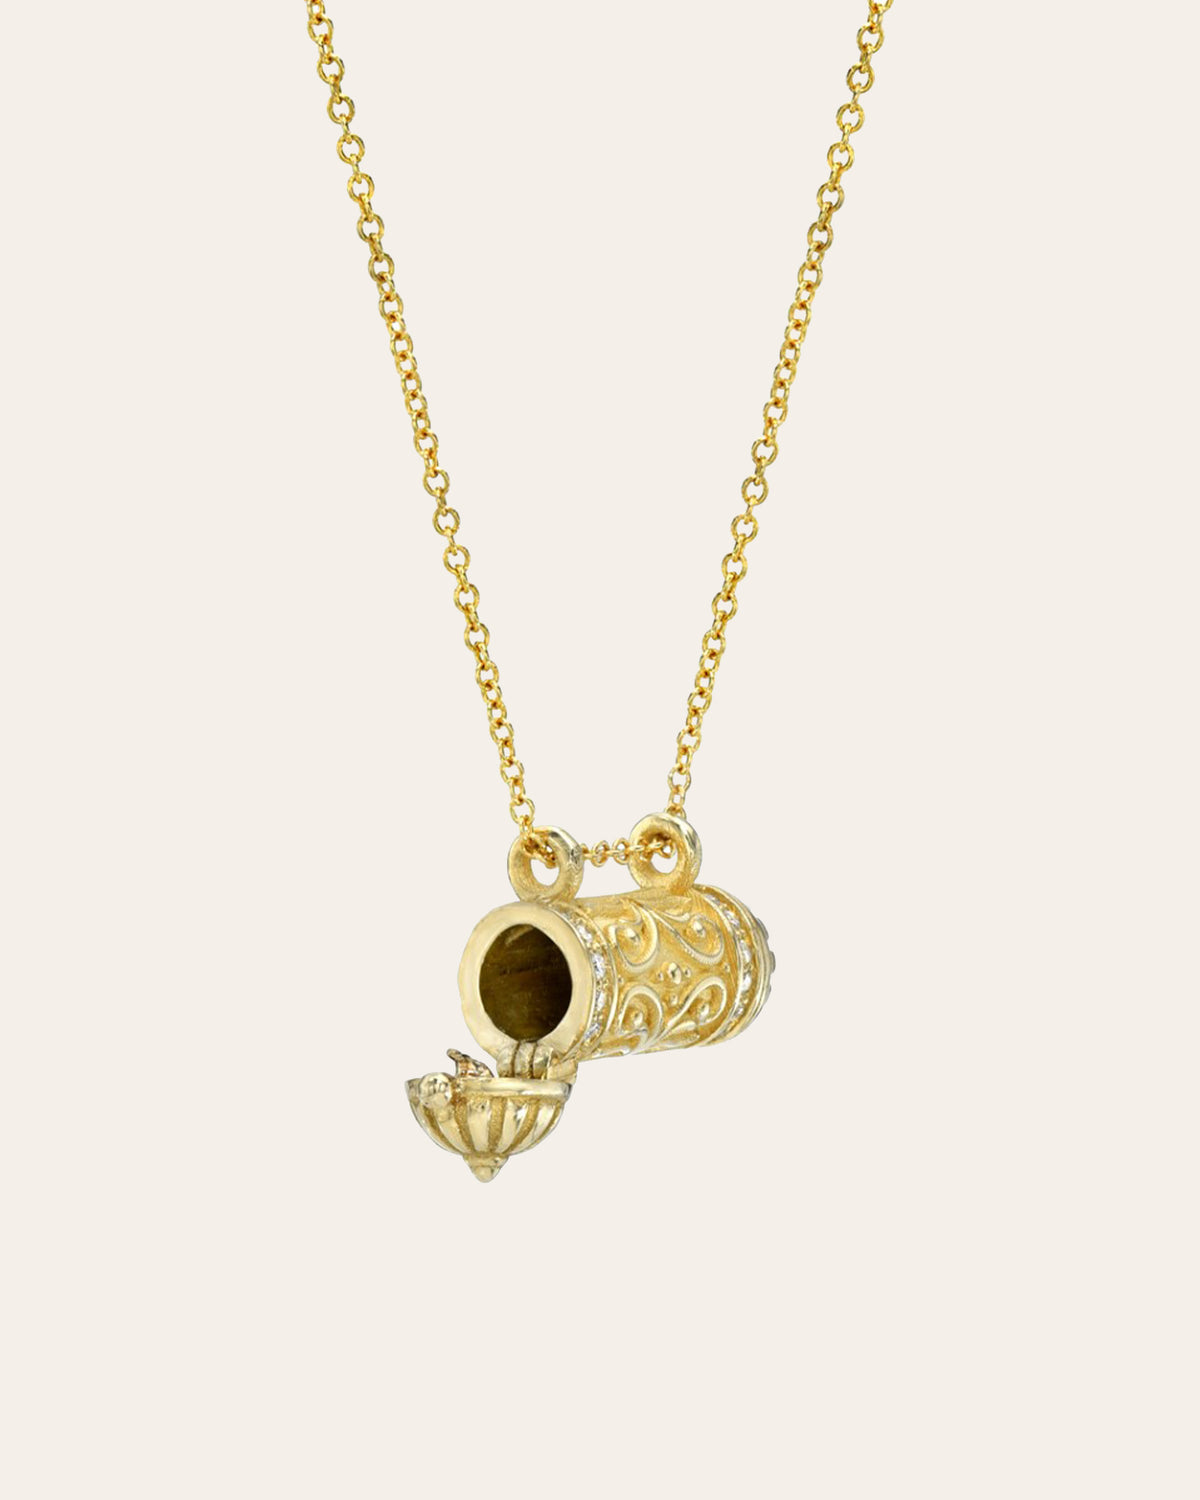 14k Gold and Diamond Amulet Necklace